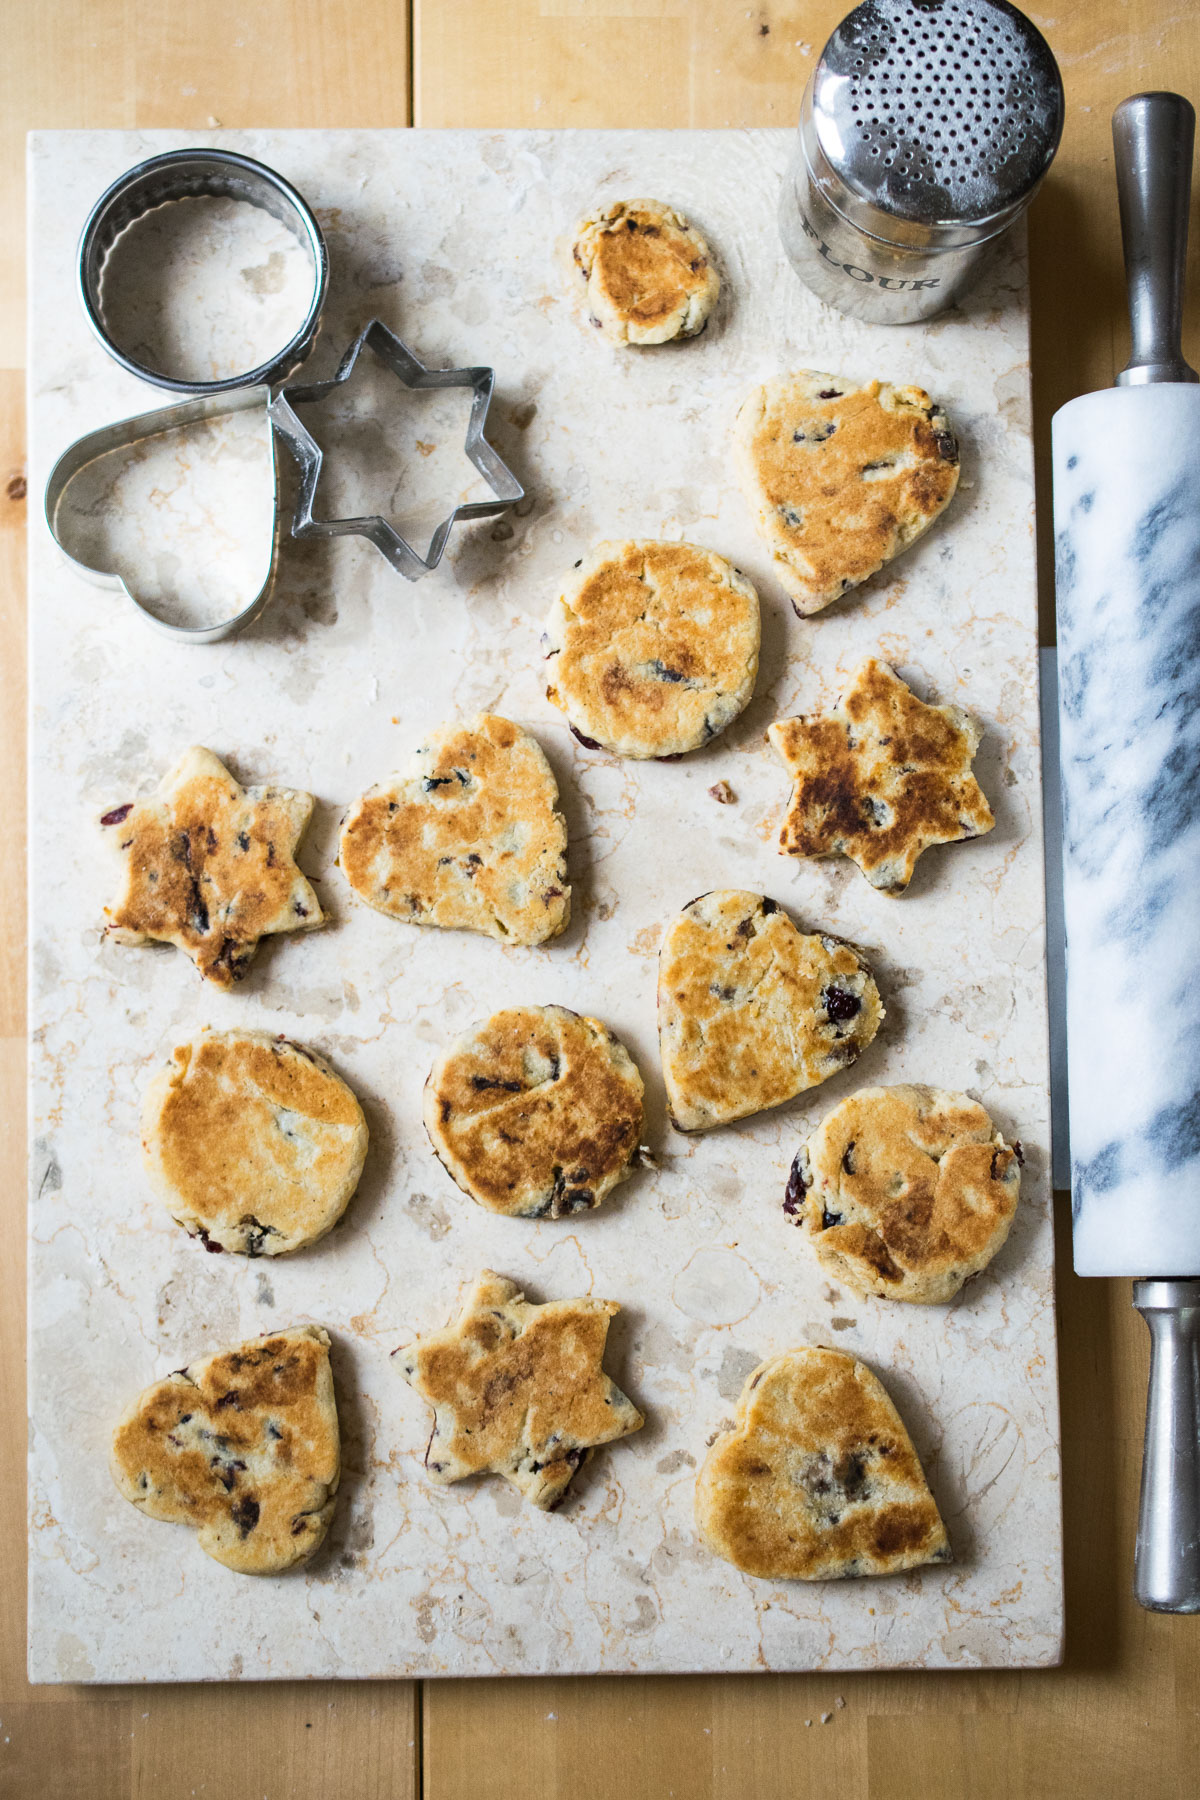 Christmas Welshcakes - spiced as per ordinary Welshcakes but studded with cranberries and clementine zest